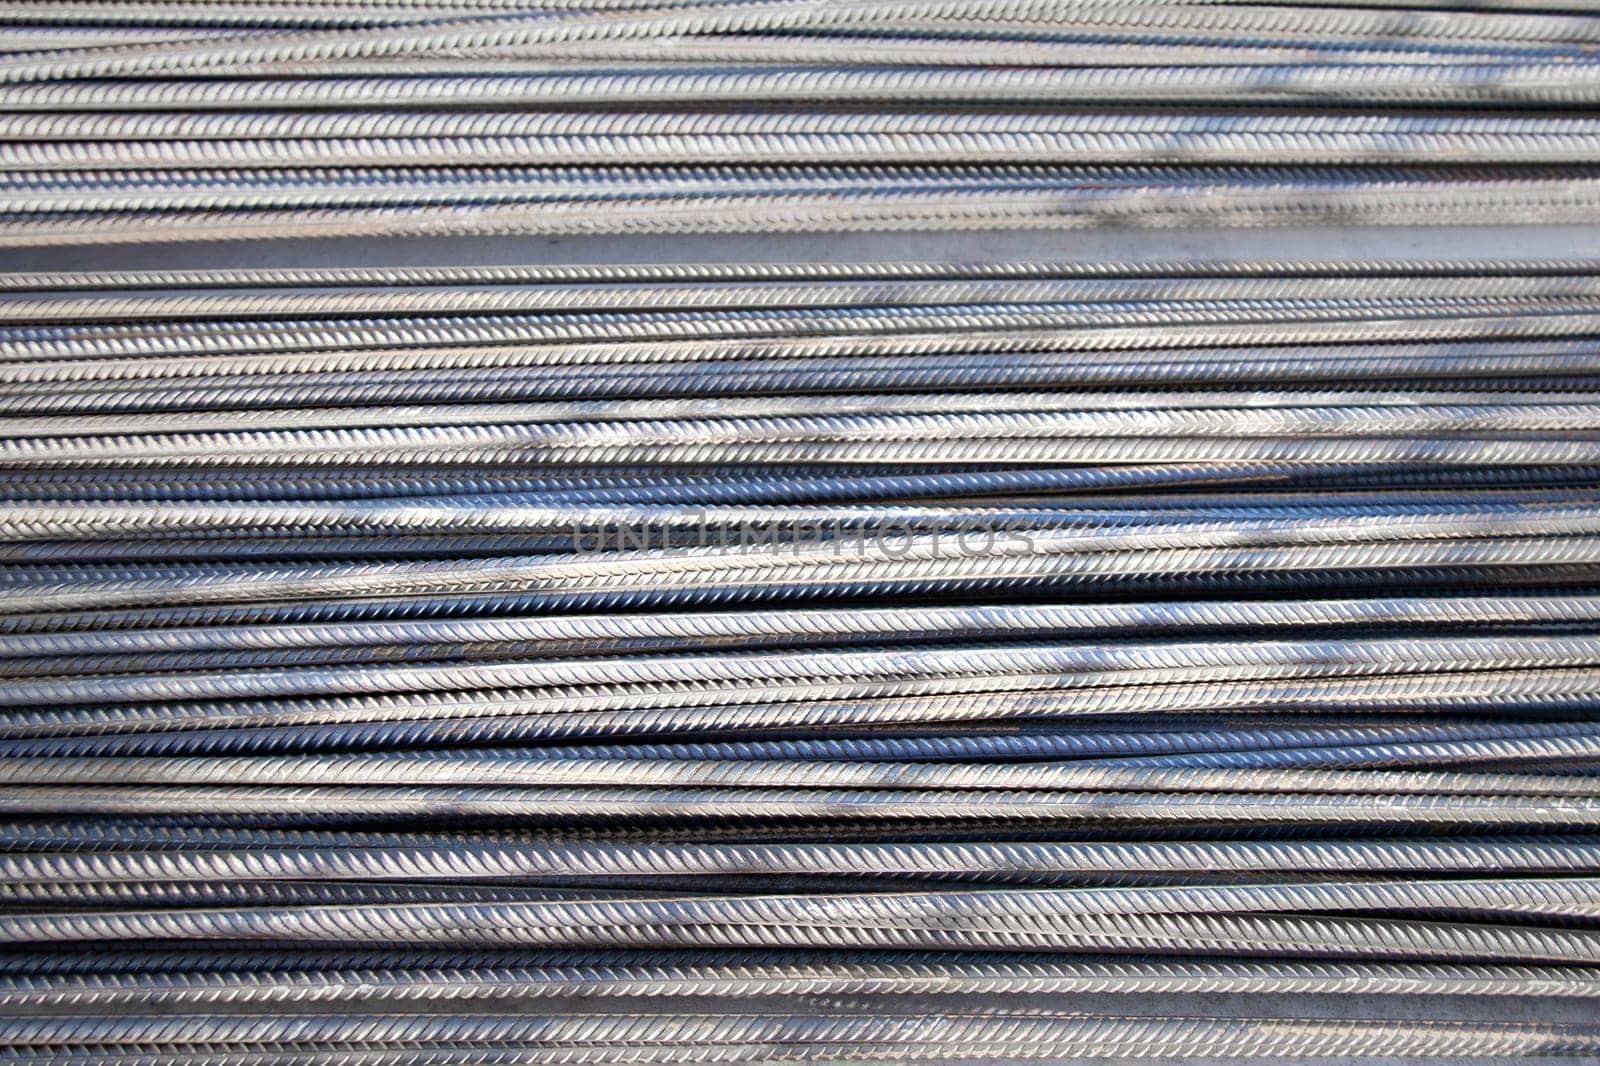 Reinforced Steel: Background of Metal and Iron Fittings, New Gray Armature Bars.